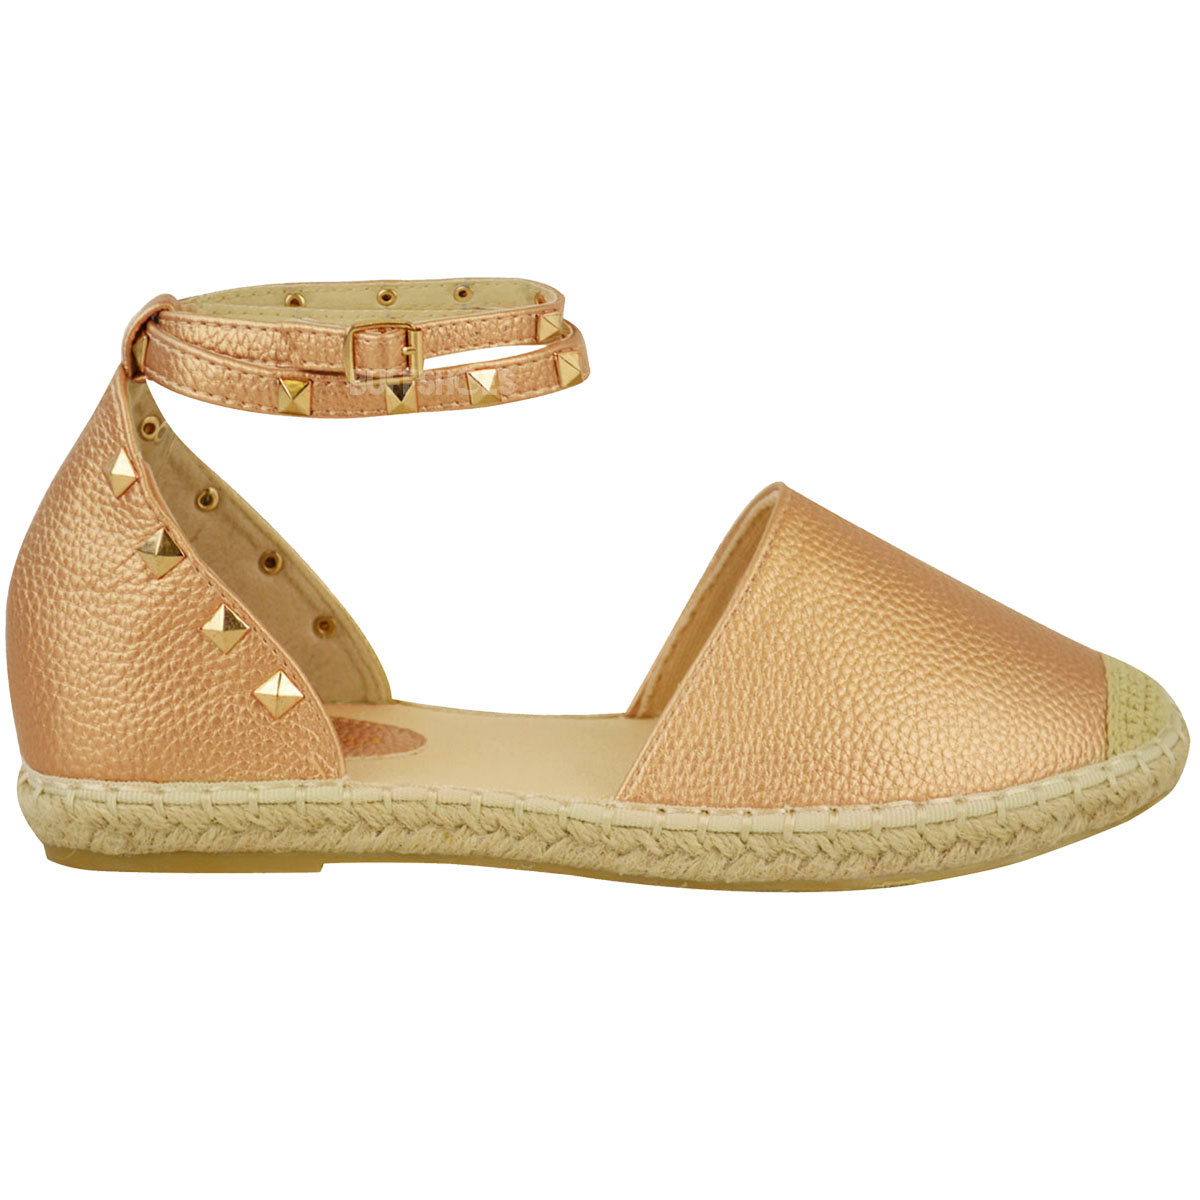 Womens Ladies Espadrilles Ankle Strappy Flat Summer Sandals Studded ...